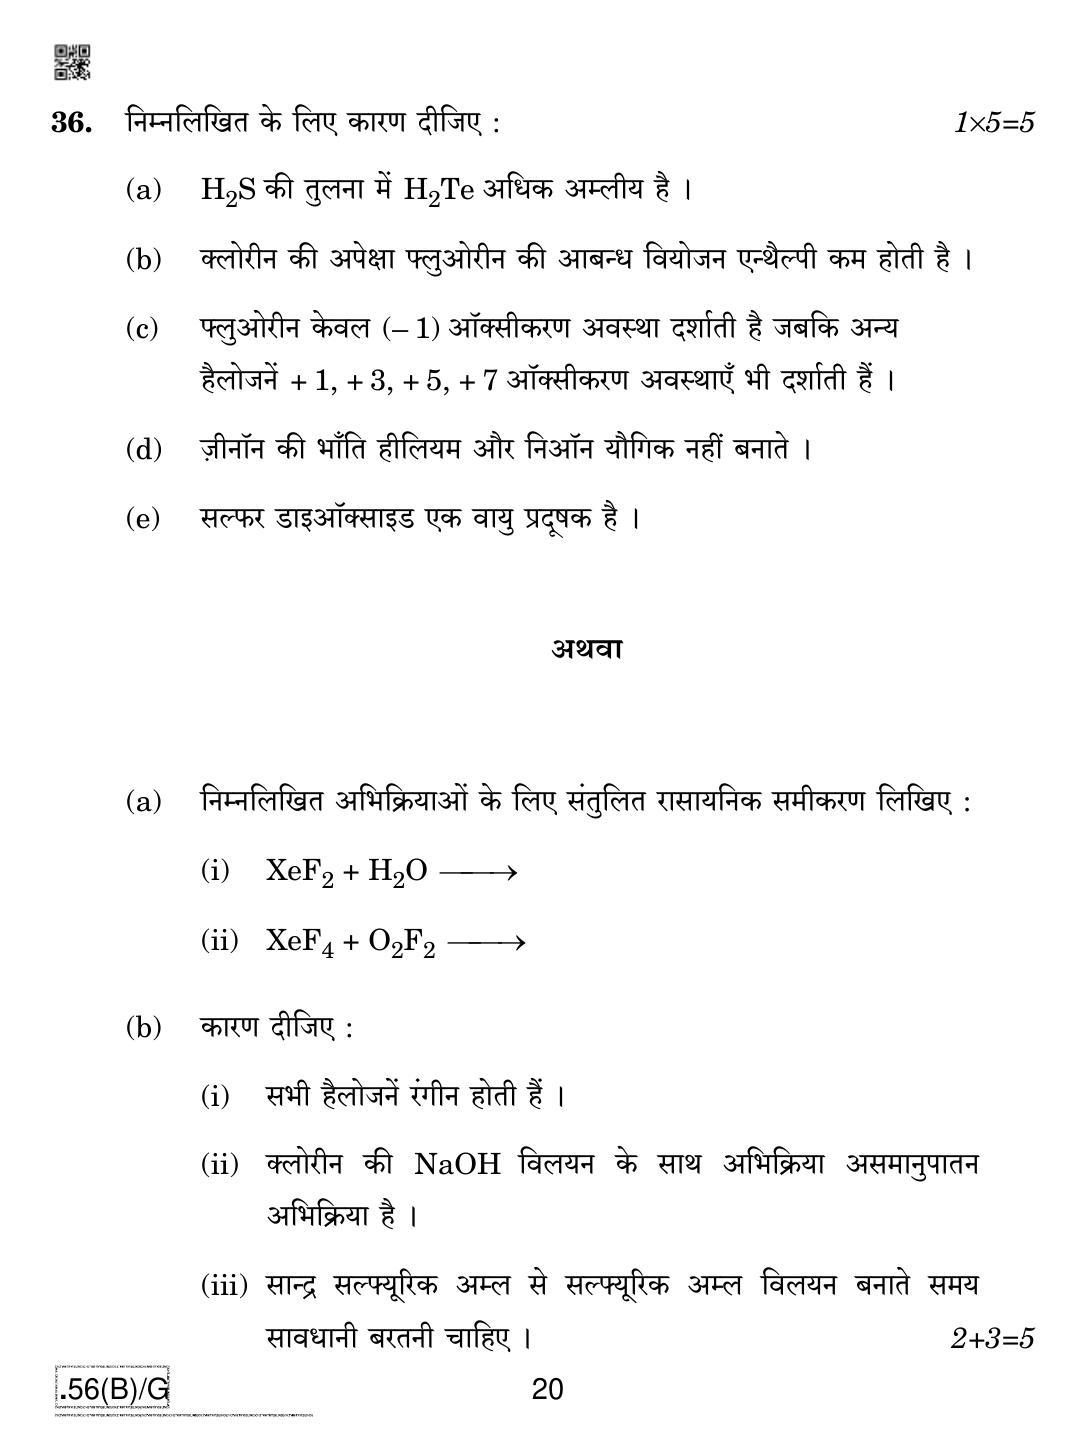 CBSE Class 12 56(B)-C - Chemistry For Blind Candidates 2020 Compartment Question Paper - Page 20